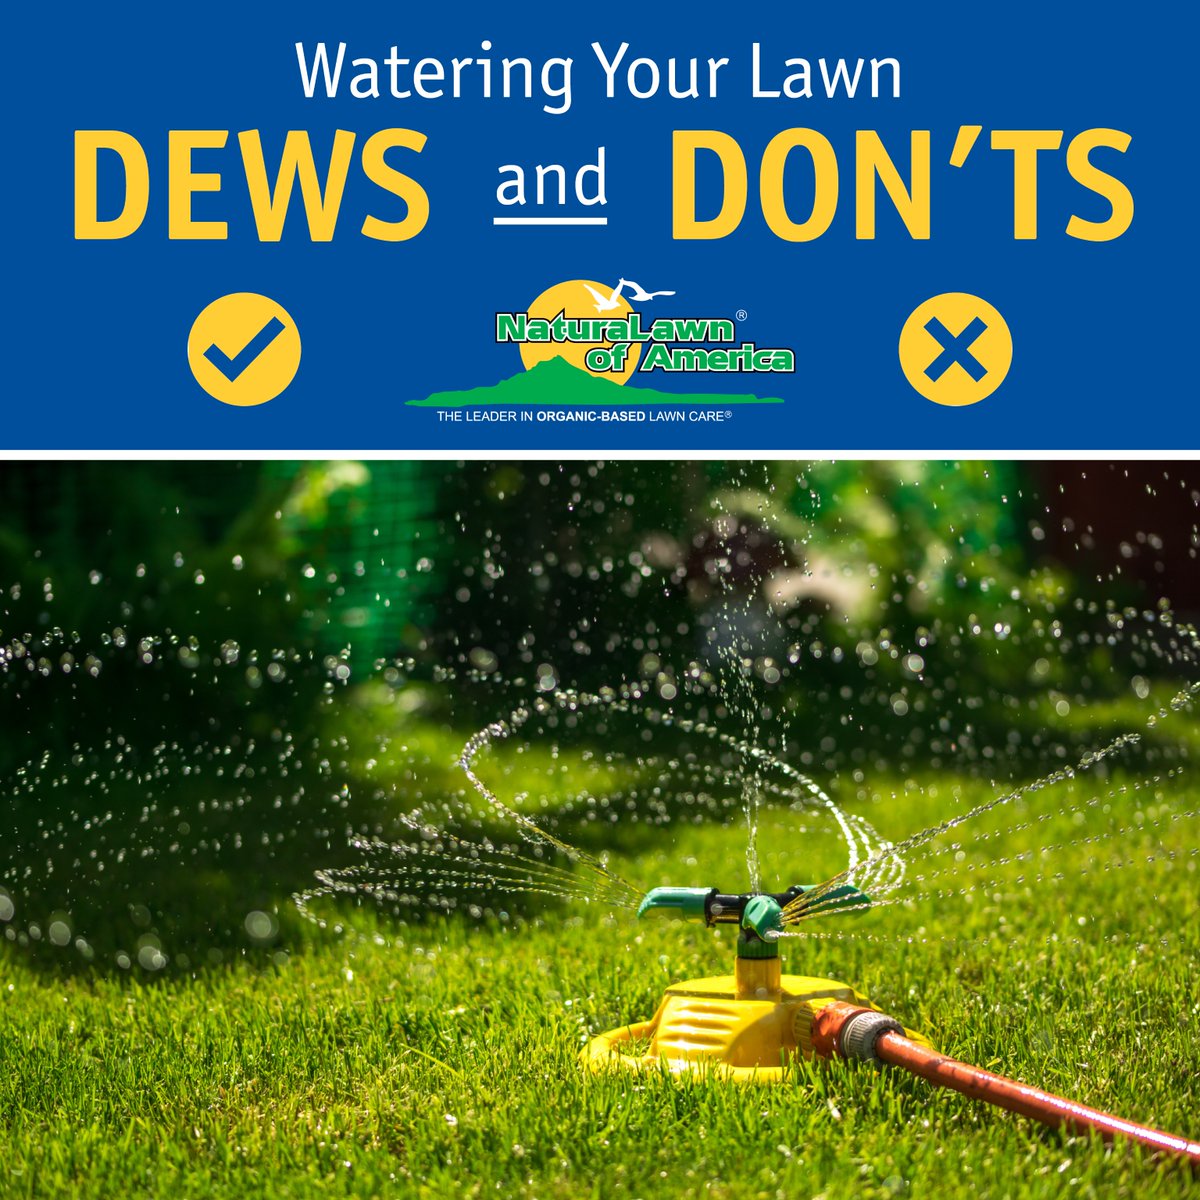 Improper watering can increase the number of weeds and decrease the health and vitality of the turf. Learn more: ow.ly/6zqB50RIuMz #NaturaLawn #NaturaLawnOfAmerica #NLA #IndustryLeader #LawnCare #Watering #GrassTips